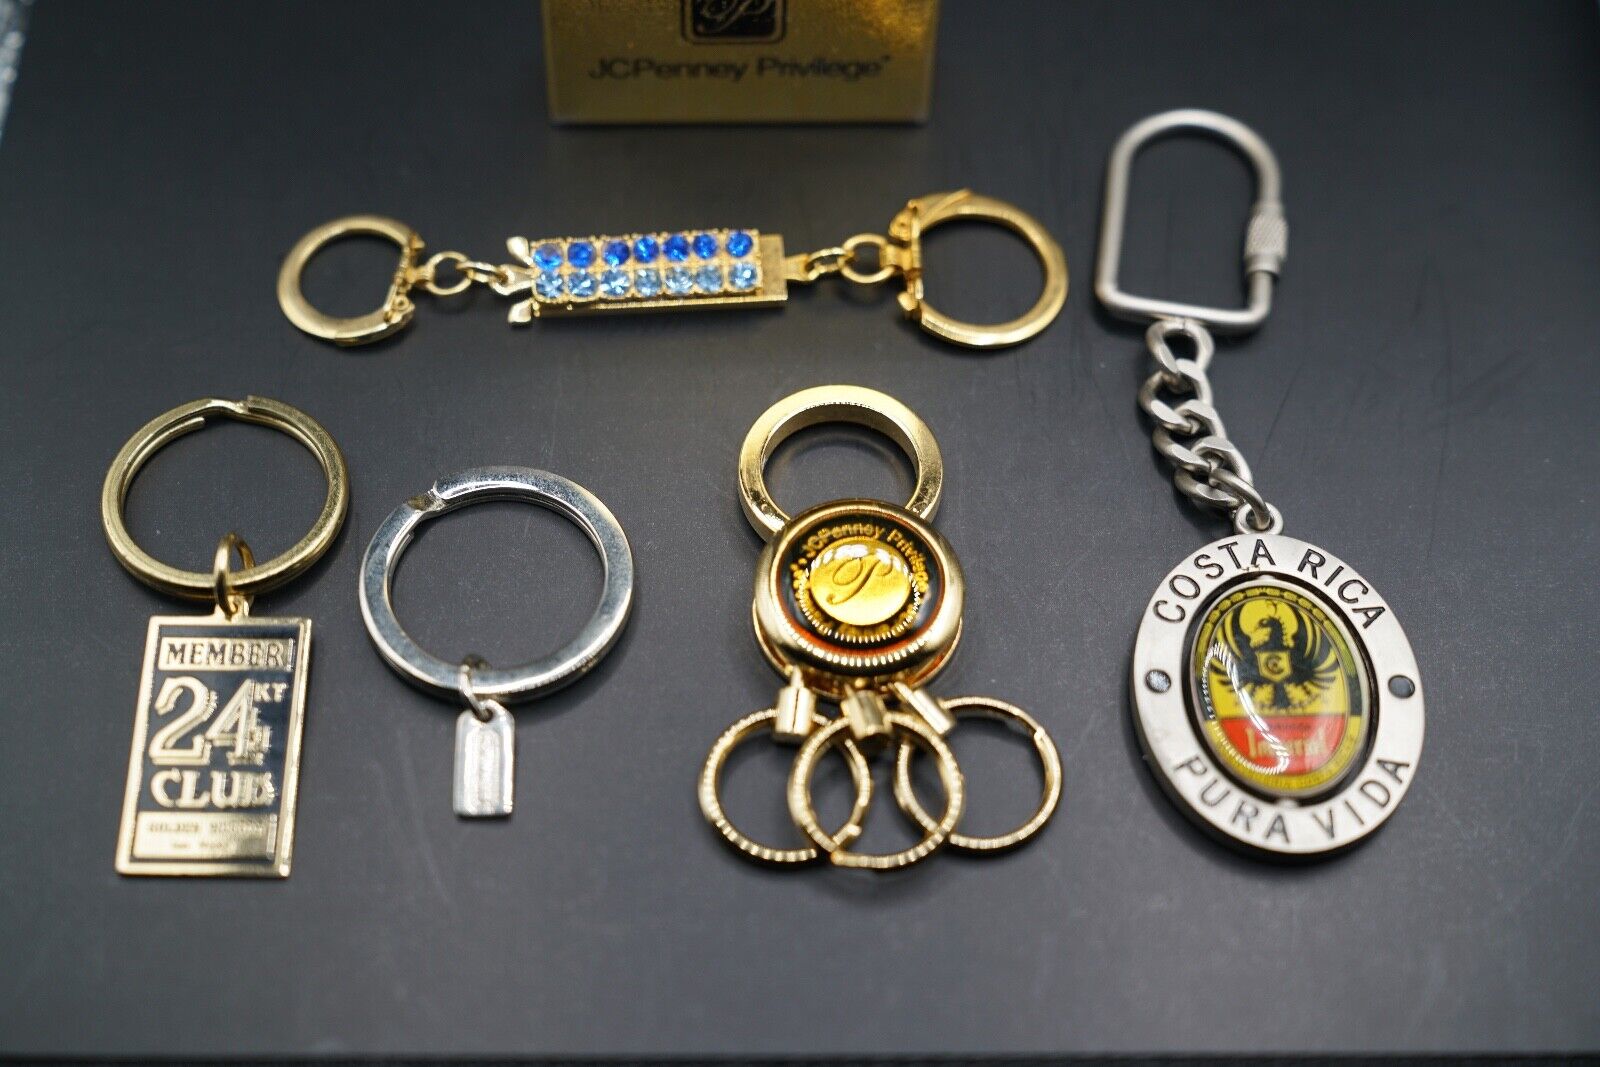 Vintage Various Keychains, Member 24 Club, Costa Rica Imperial, Coach  Lot of 5